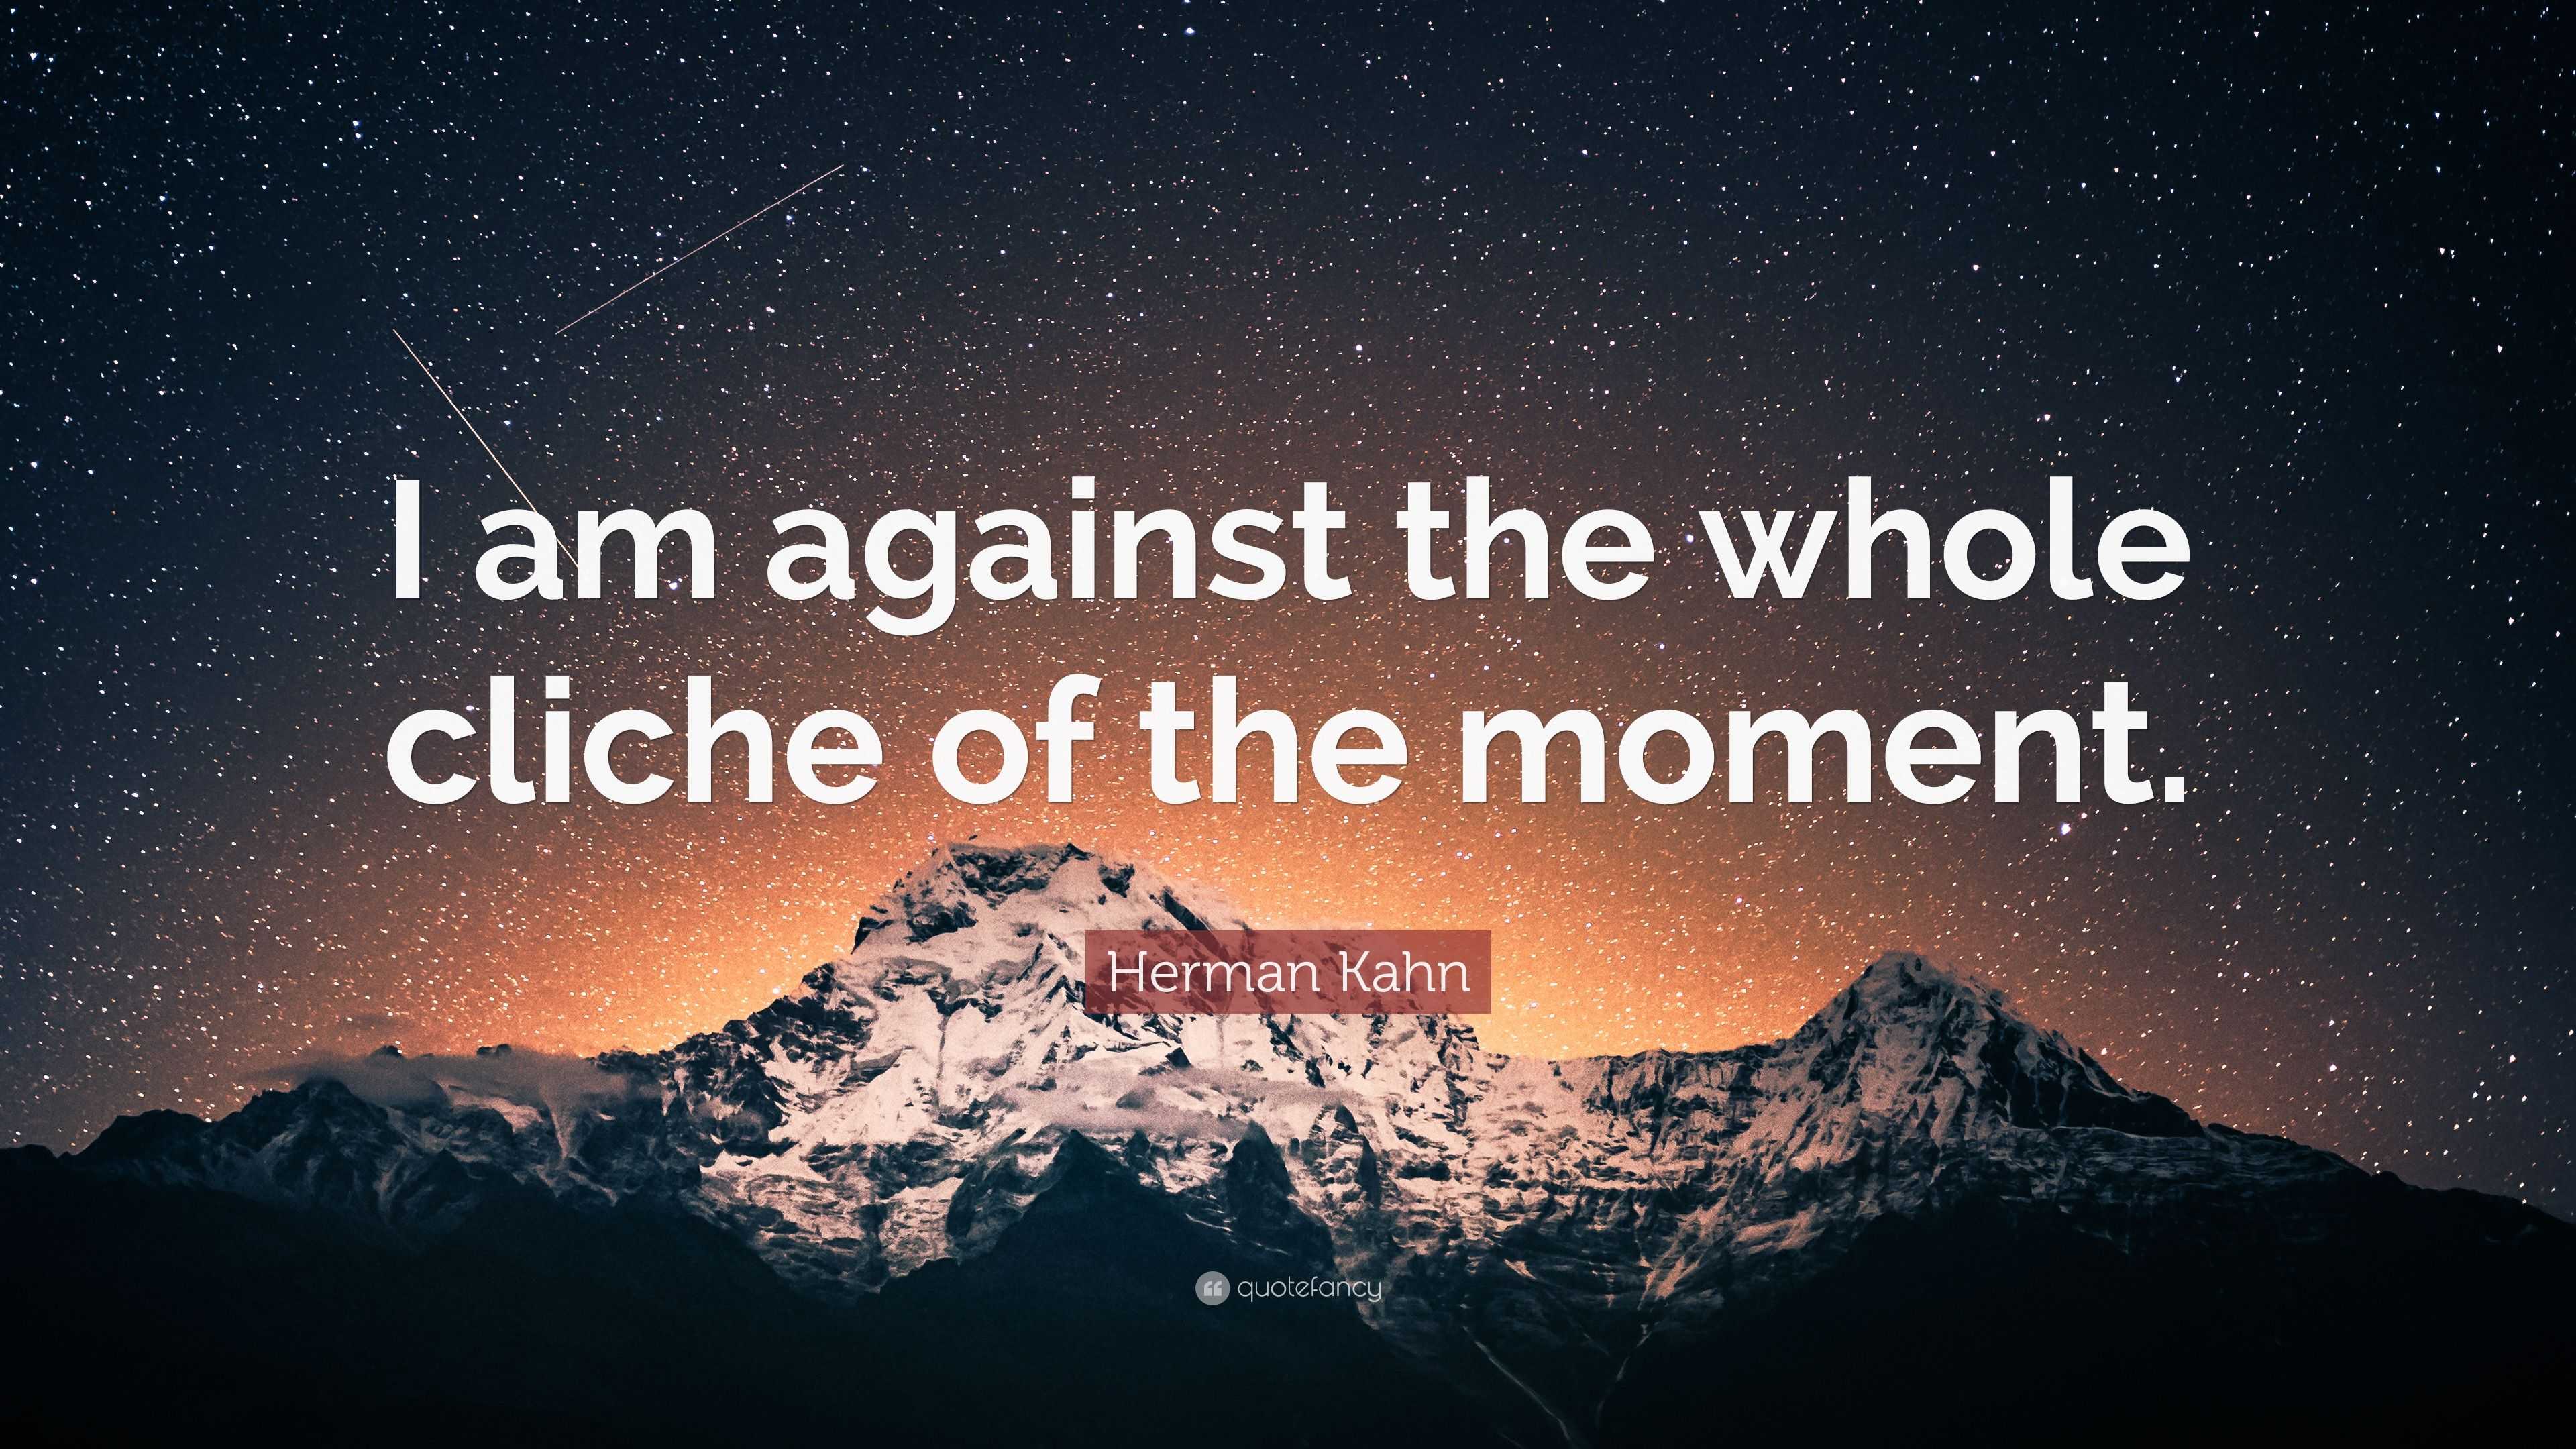 Herman Kahn Quote: “I am against the whole cliche of the moment.”